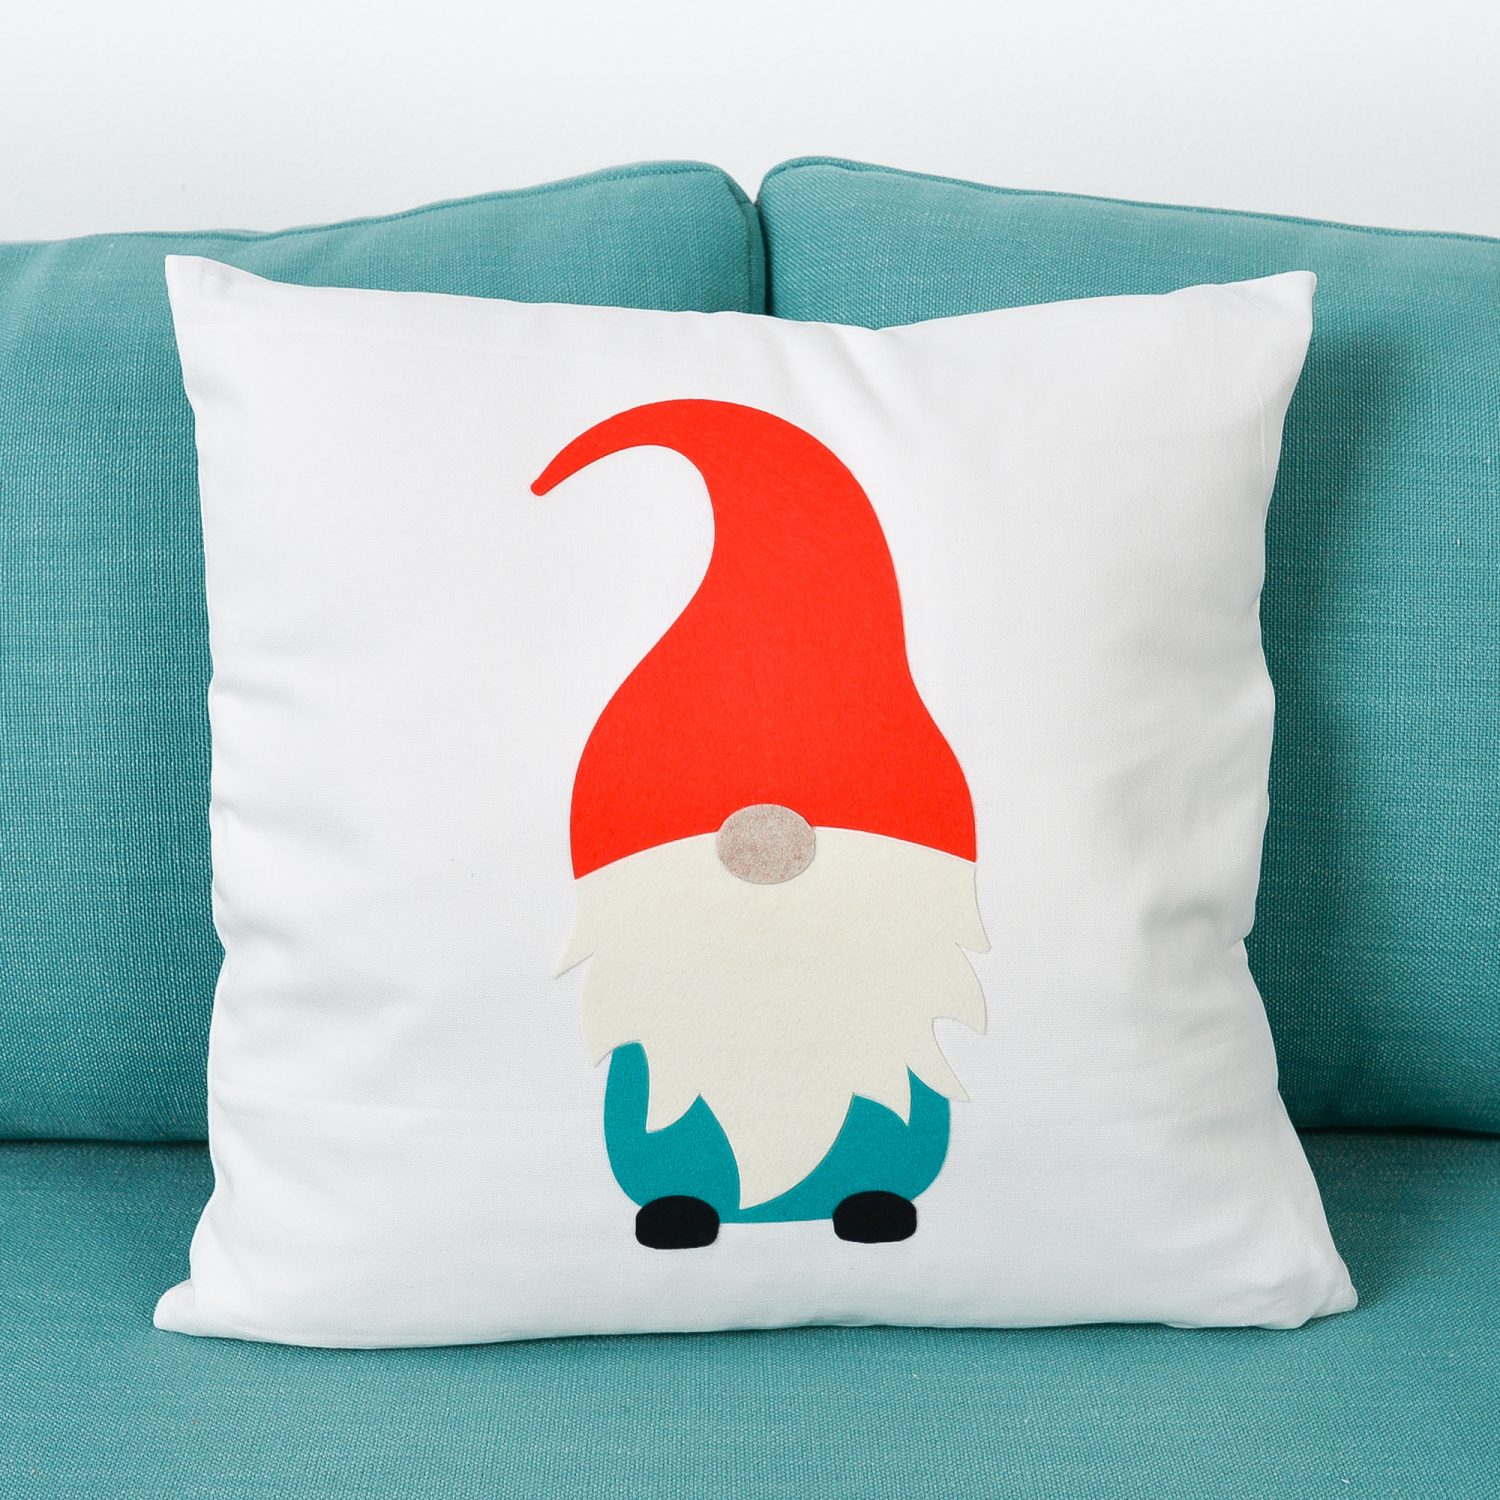 Felt gnome pillow sitting on a blue couch.